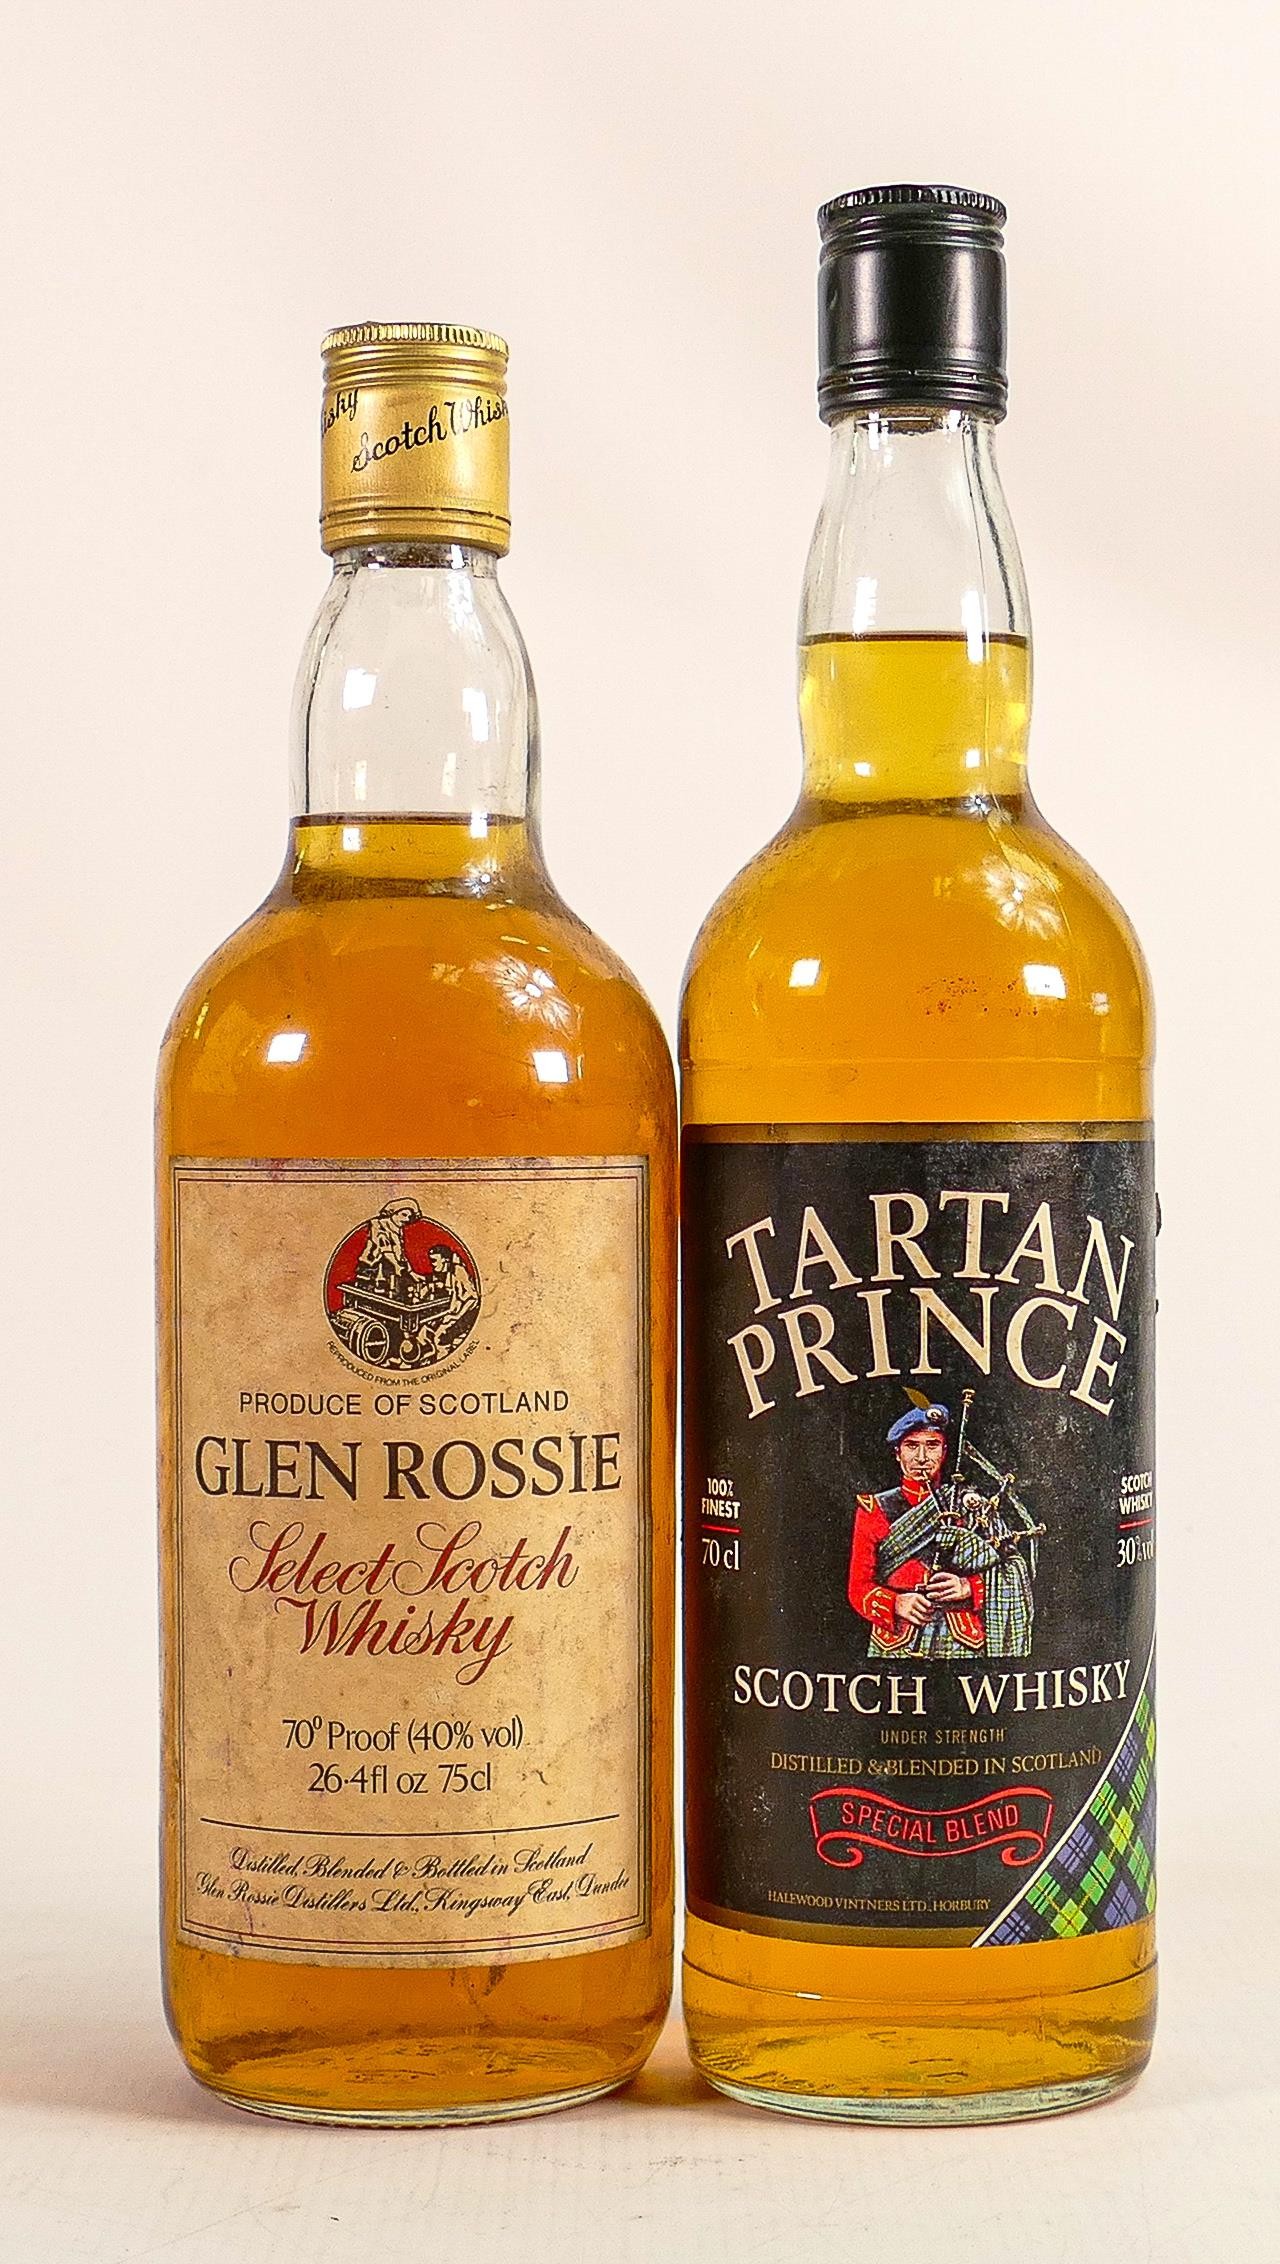 Glen Rossie Select Scotch Whisky together with similar Tartan Prince Special Blend Scotch Whisky. (